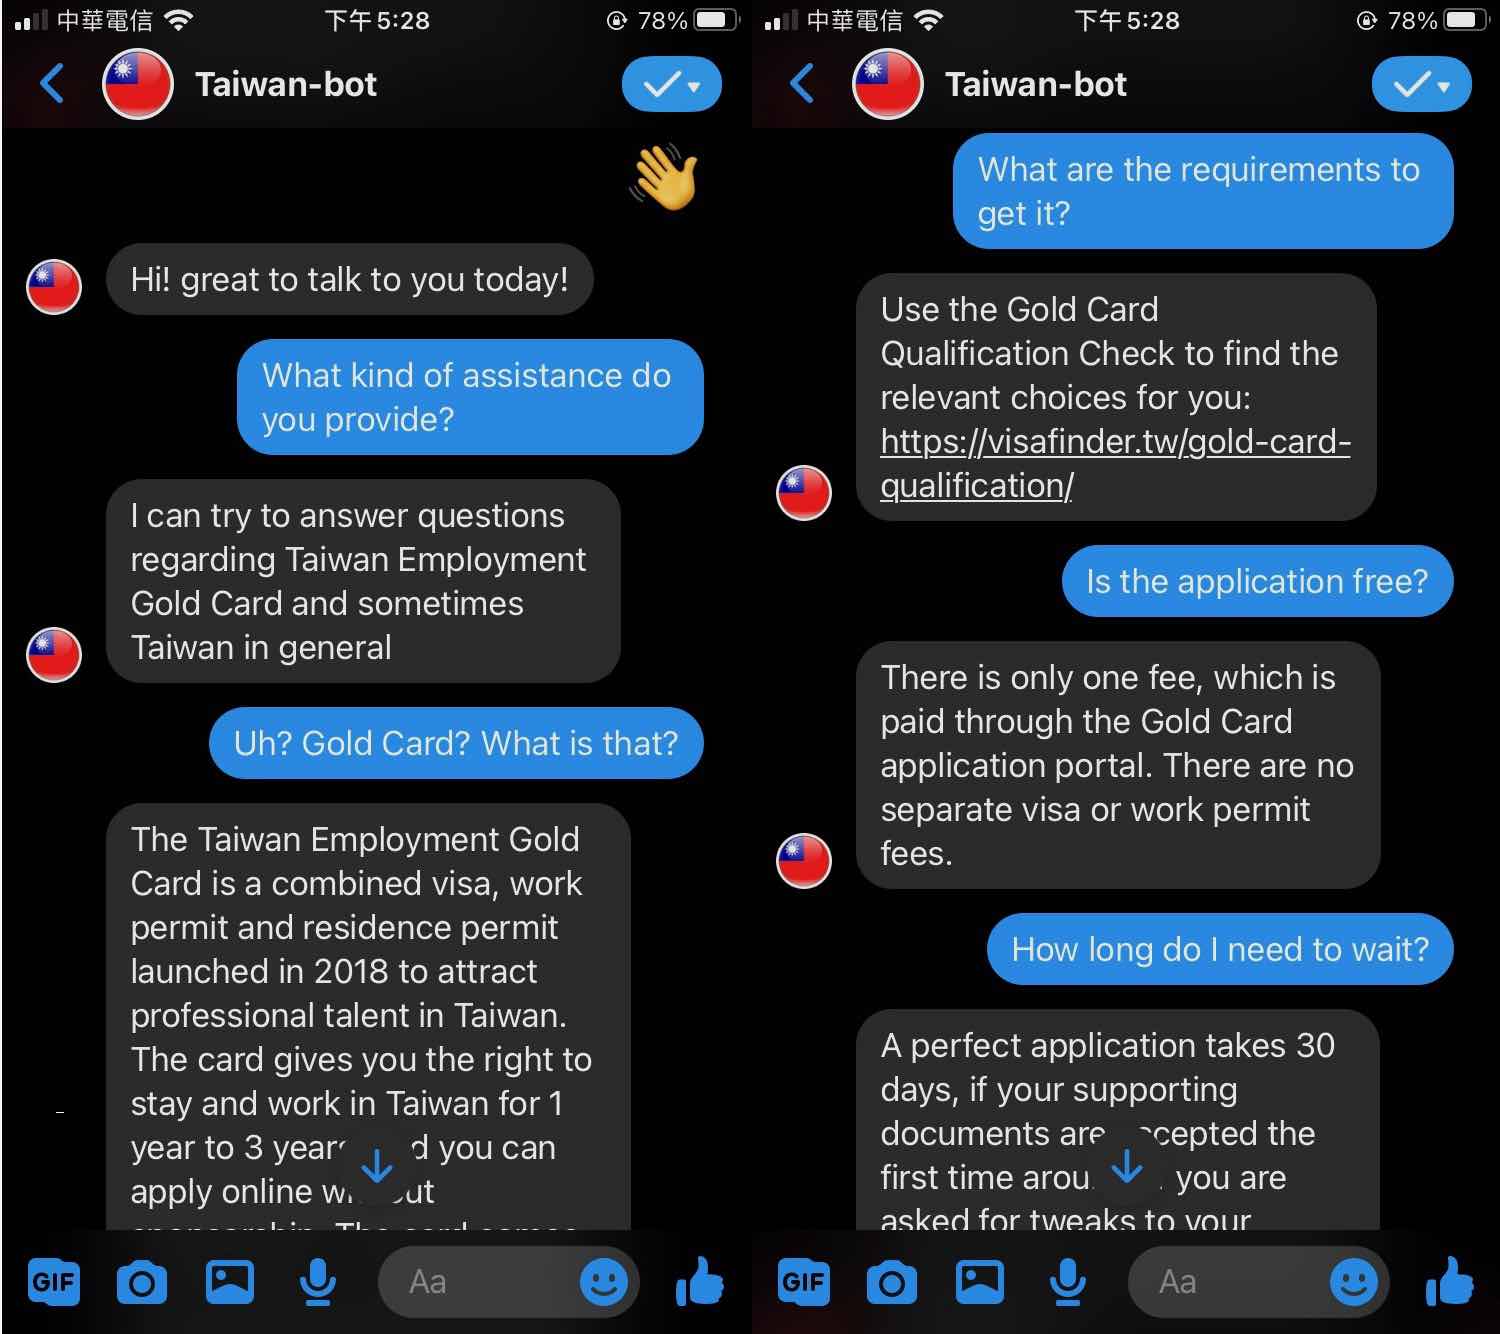 Conversation with the bot